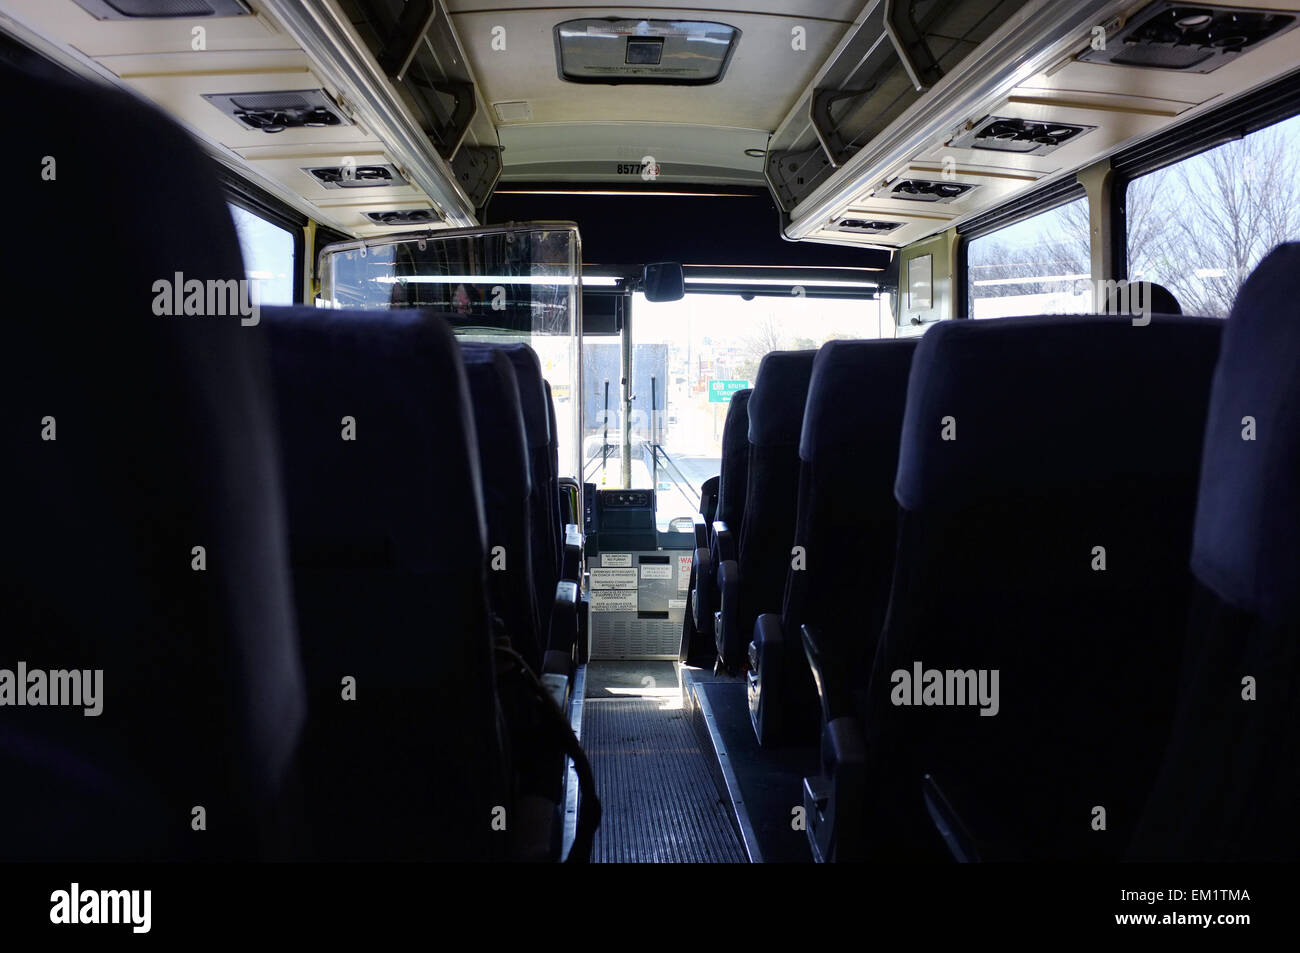 The view inside a Greyhound coach looking down a row of seats towards the driver. Stock Photo